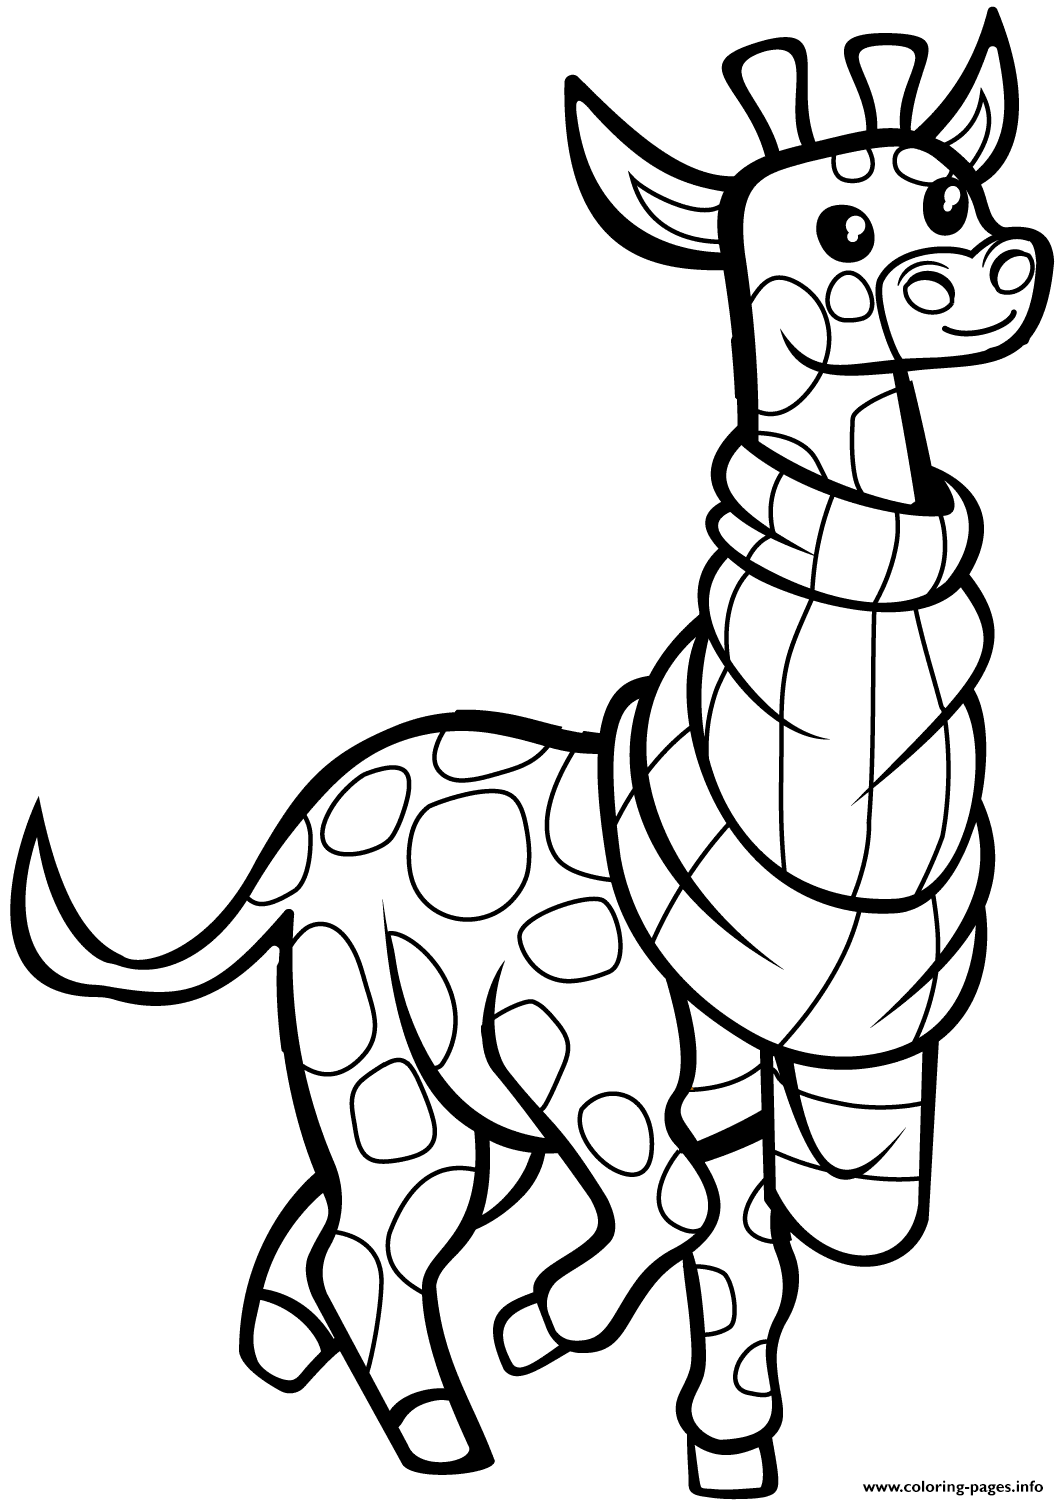 Funny Giraffe With Scarf coloring